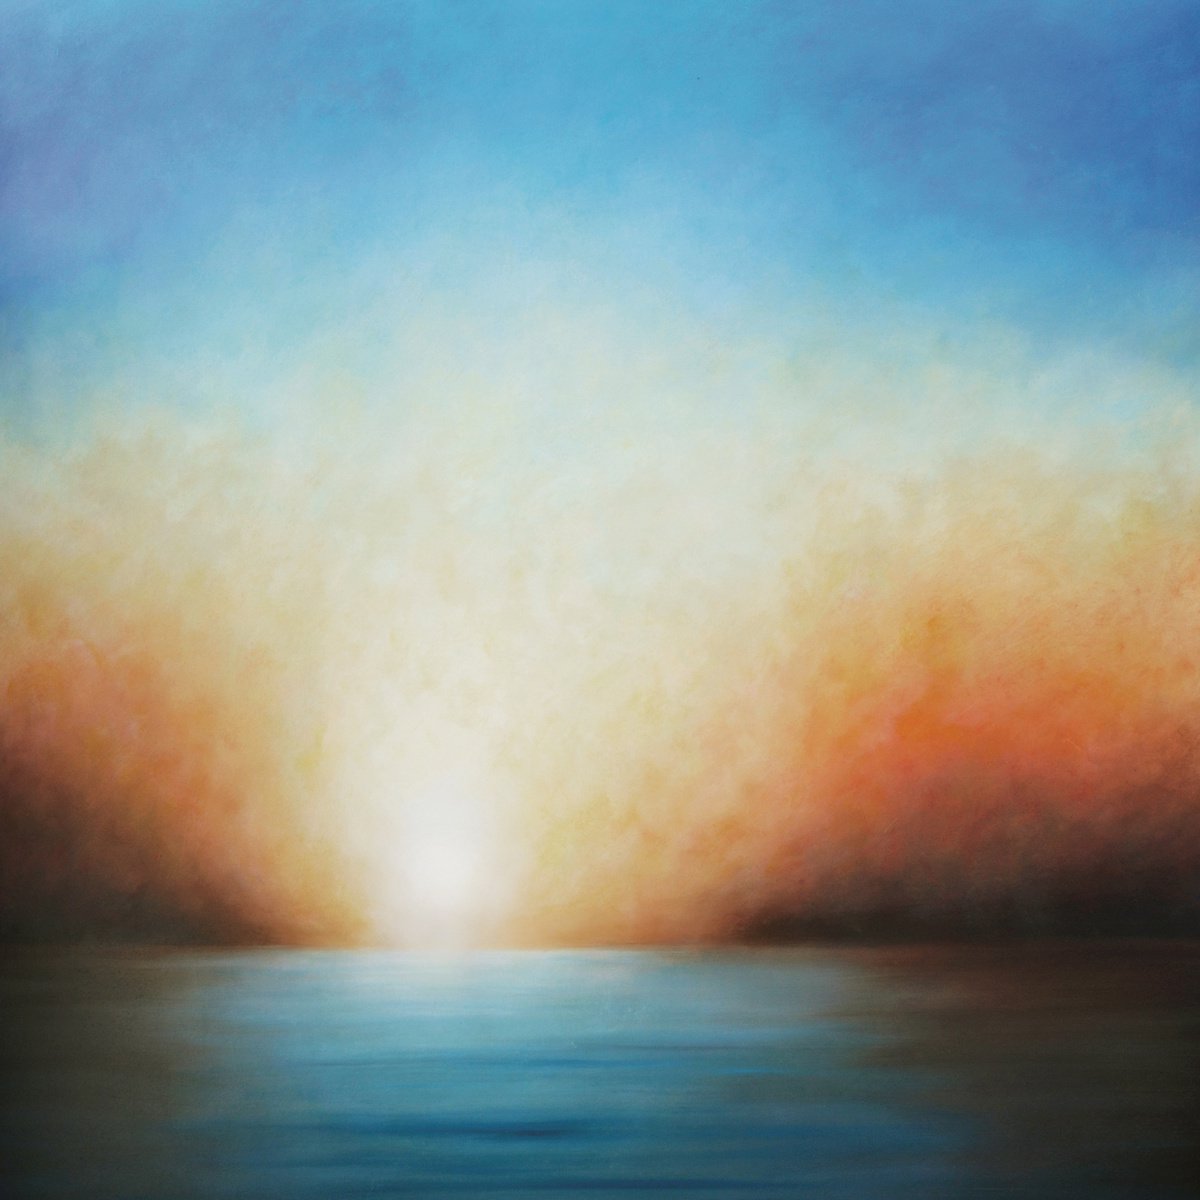 Light in the Fog above the Sea by Waldemar Kaliczak